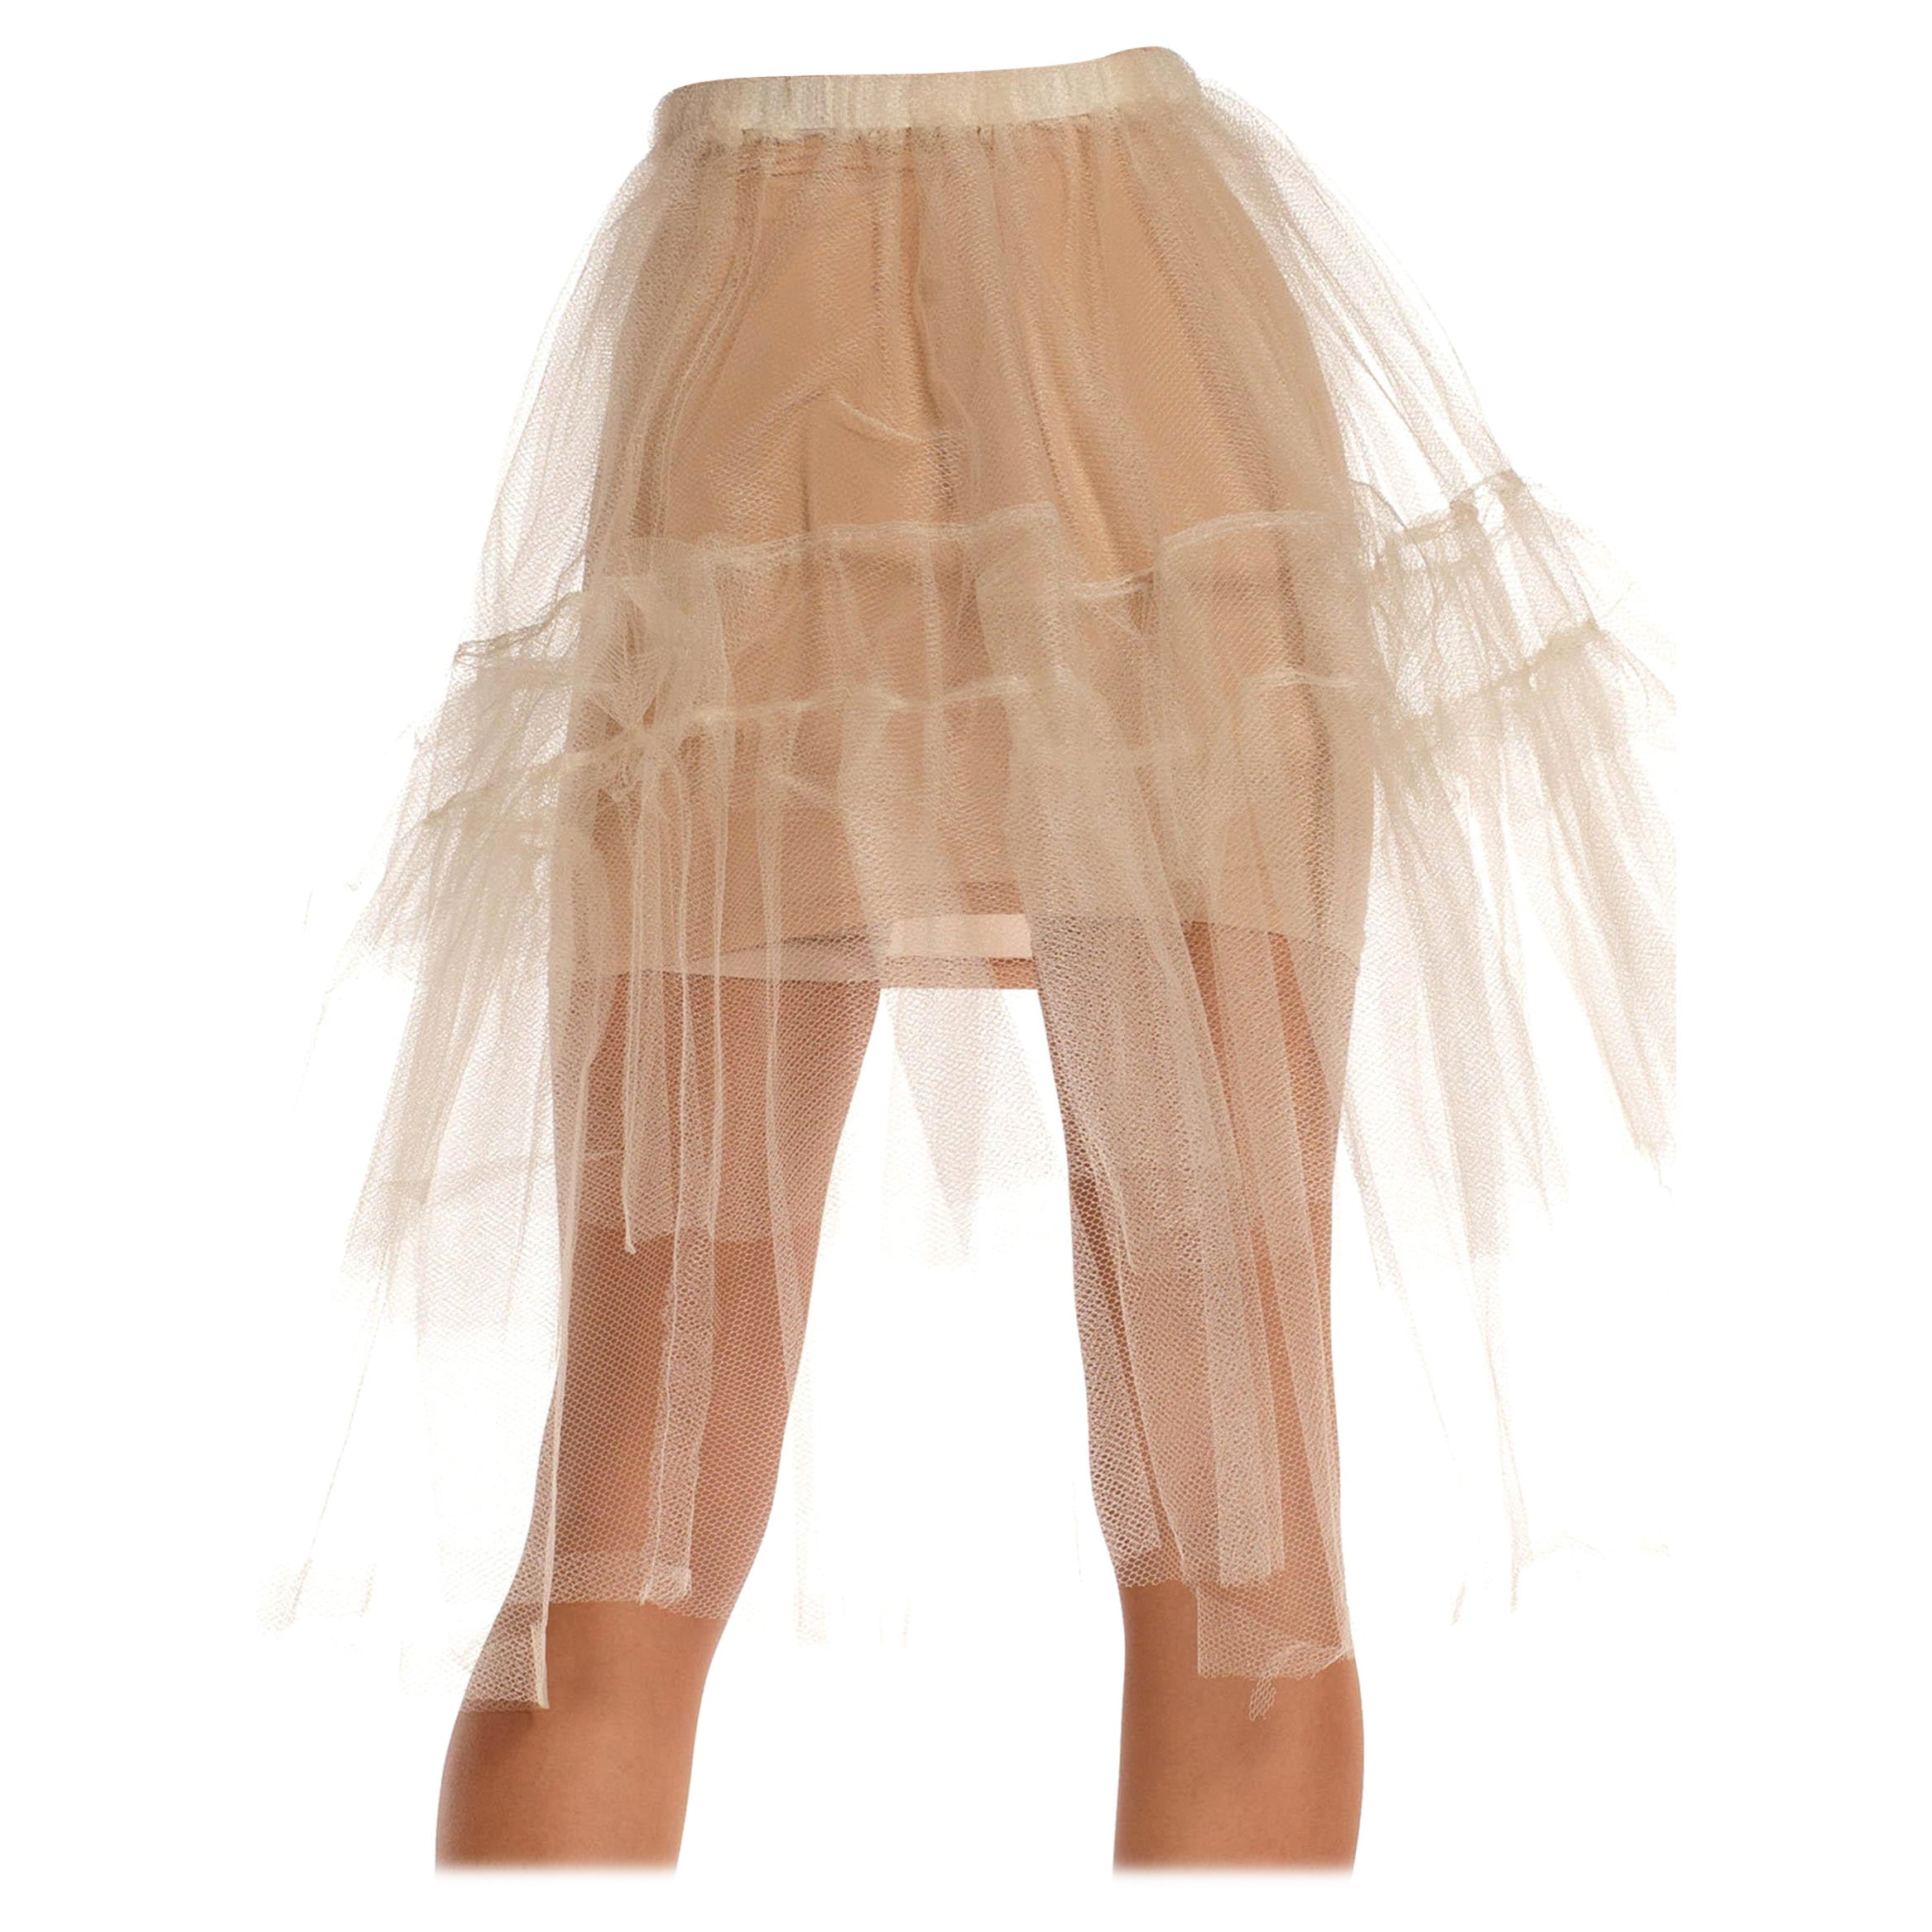 1980S White Tulle Tiered Tutu Skirt With Elastic Waistband For Sale